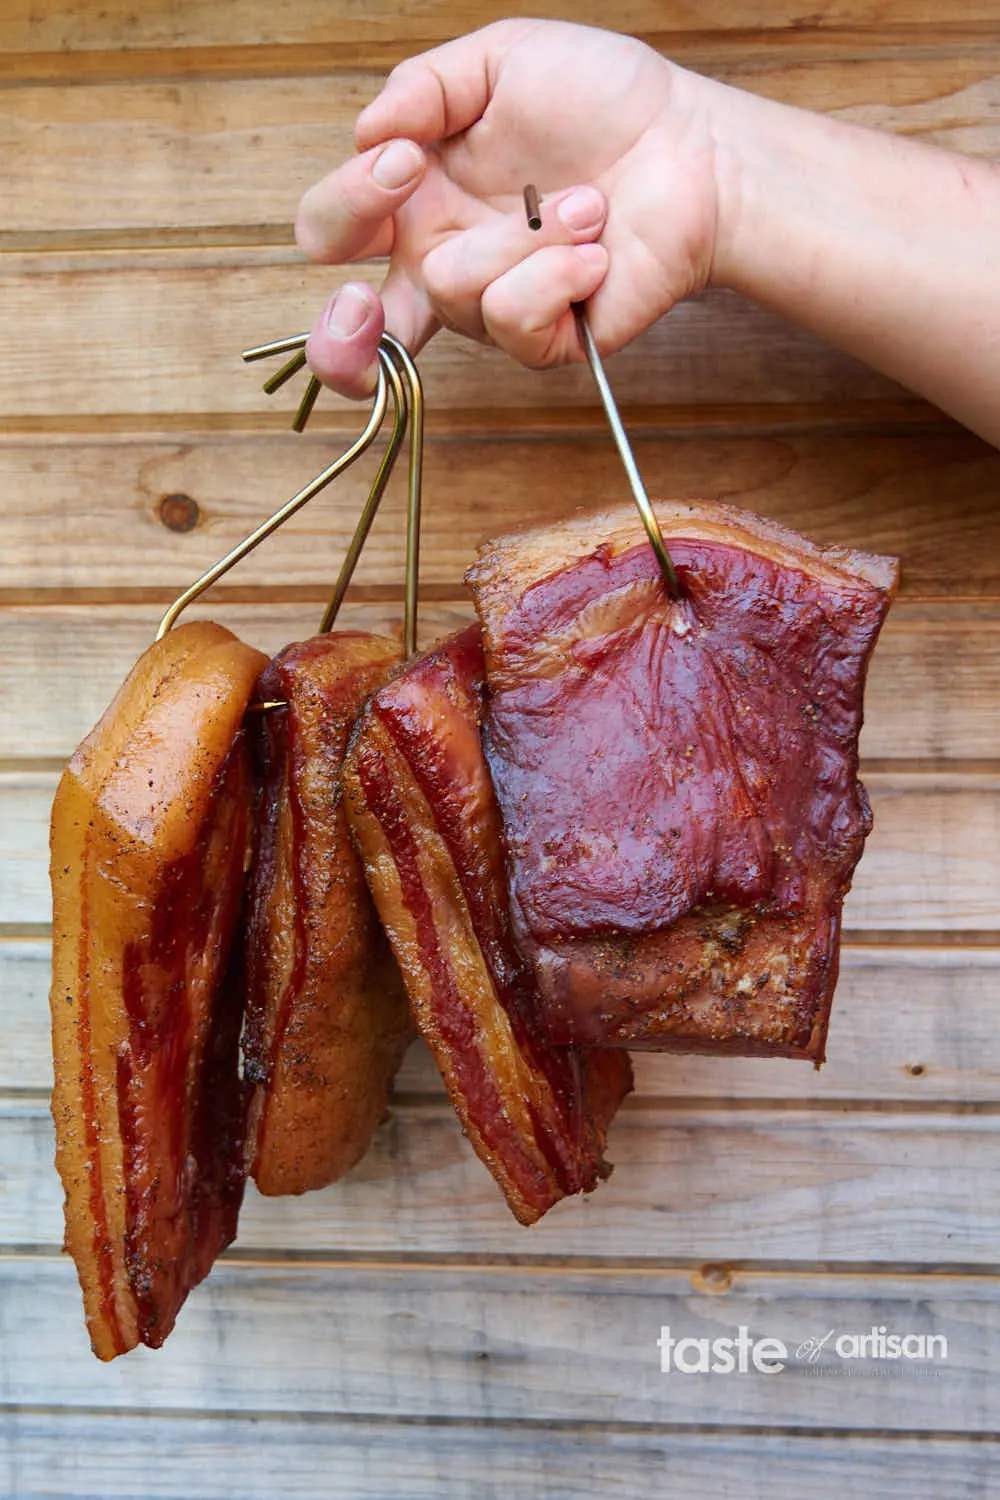 smoked slab bacon recipes - What's the difference between bacon and slab bacon